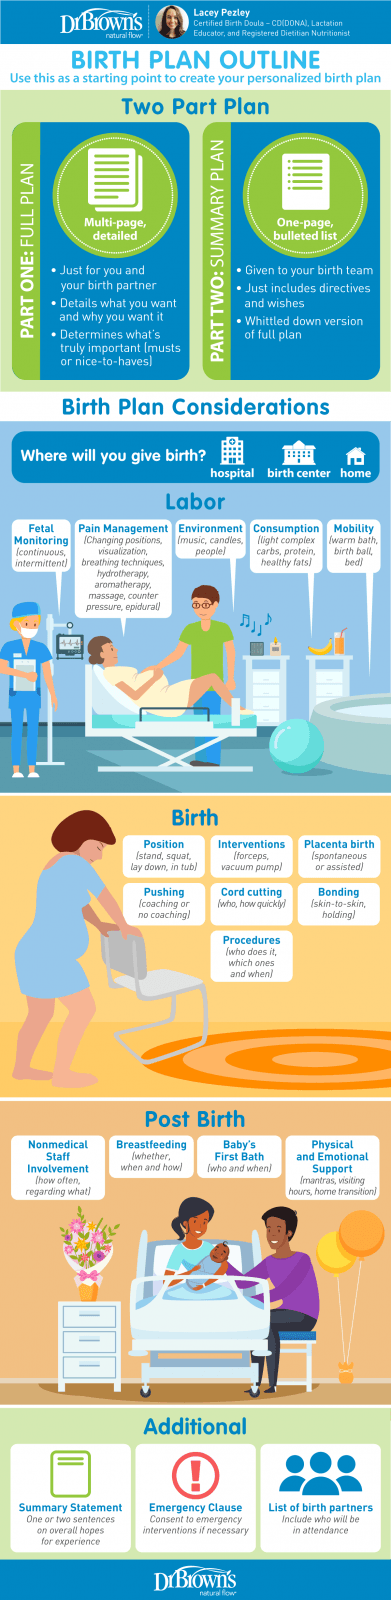 How to Create a Birth Plan